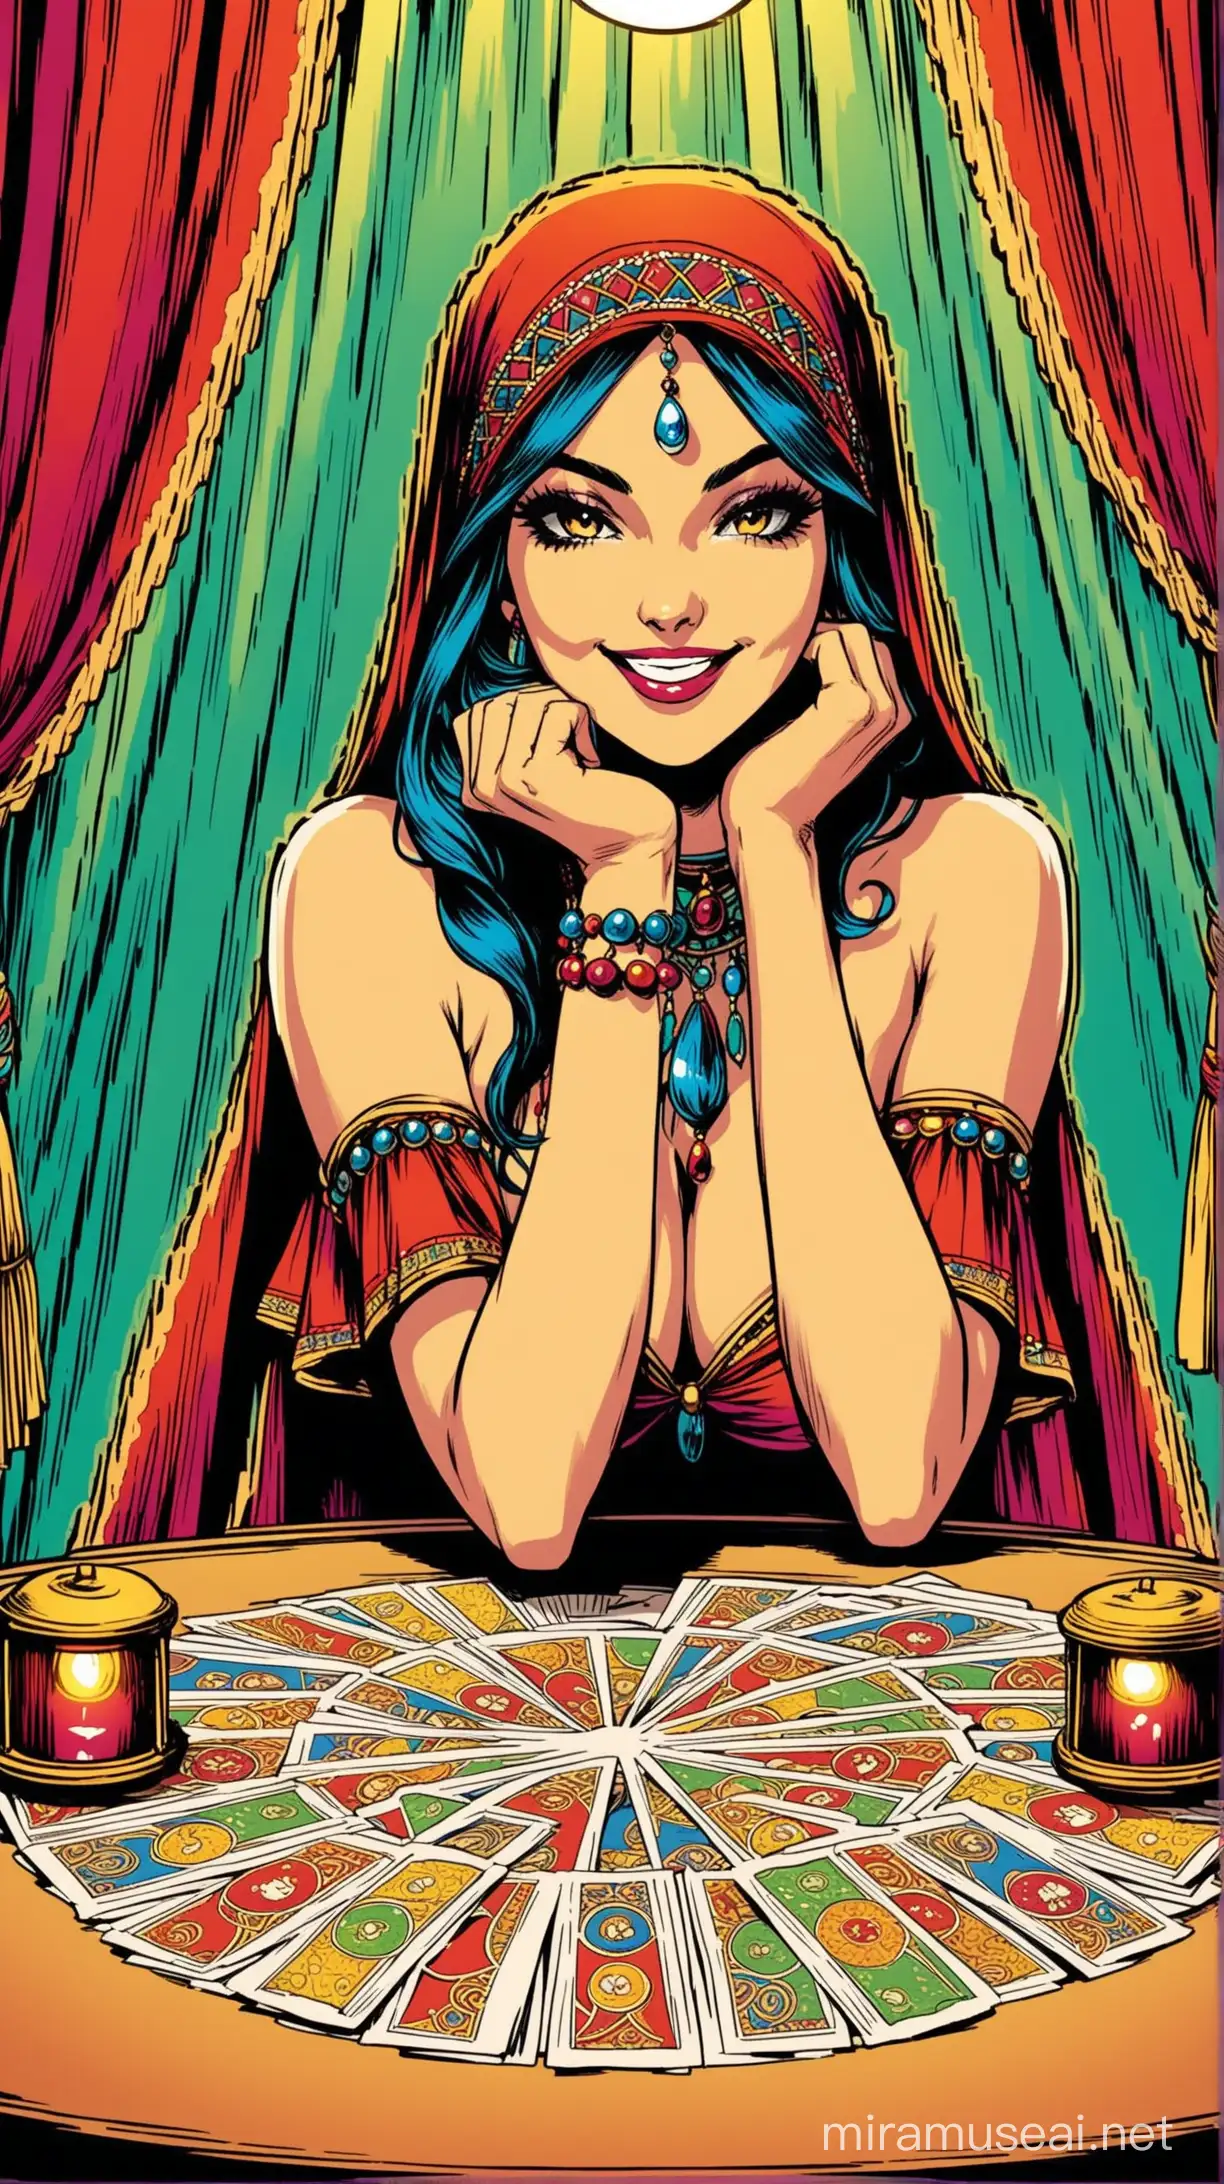 Smiling Gypsy Fortune Teller Behind MarvelStyle Curtains